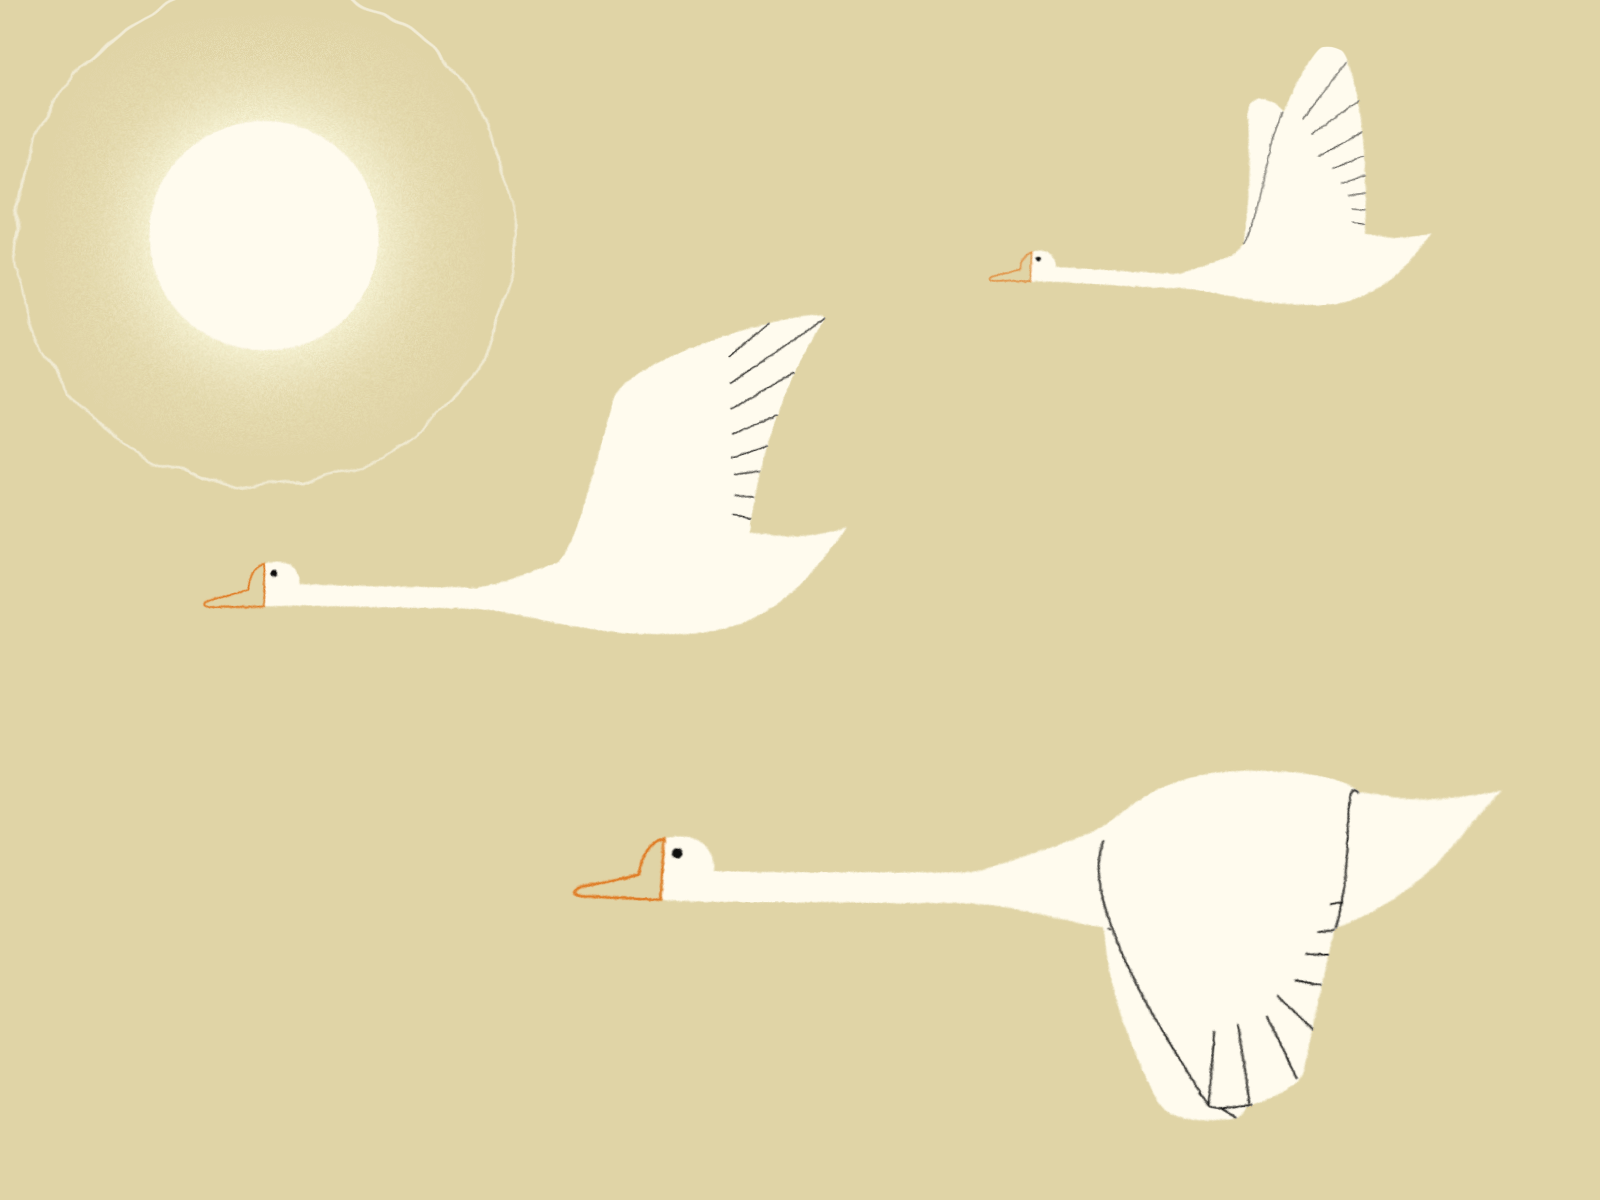 Geese aftereffects animate animation birds flying frame by frame geese goose illustration motion graphics vector